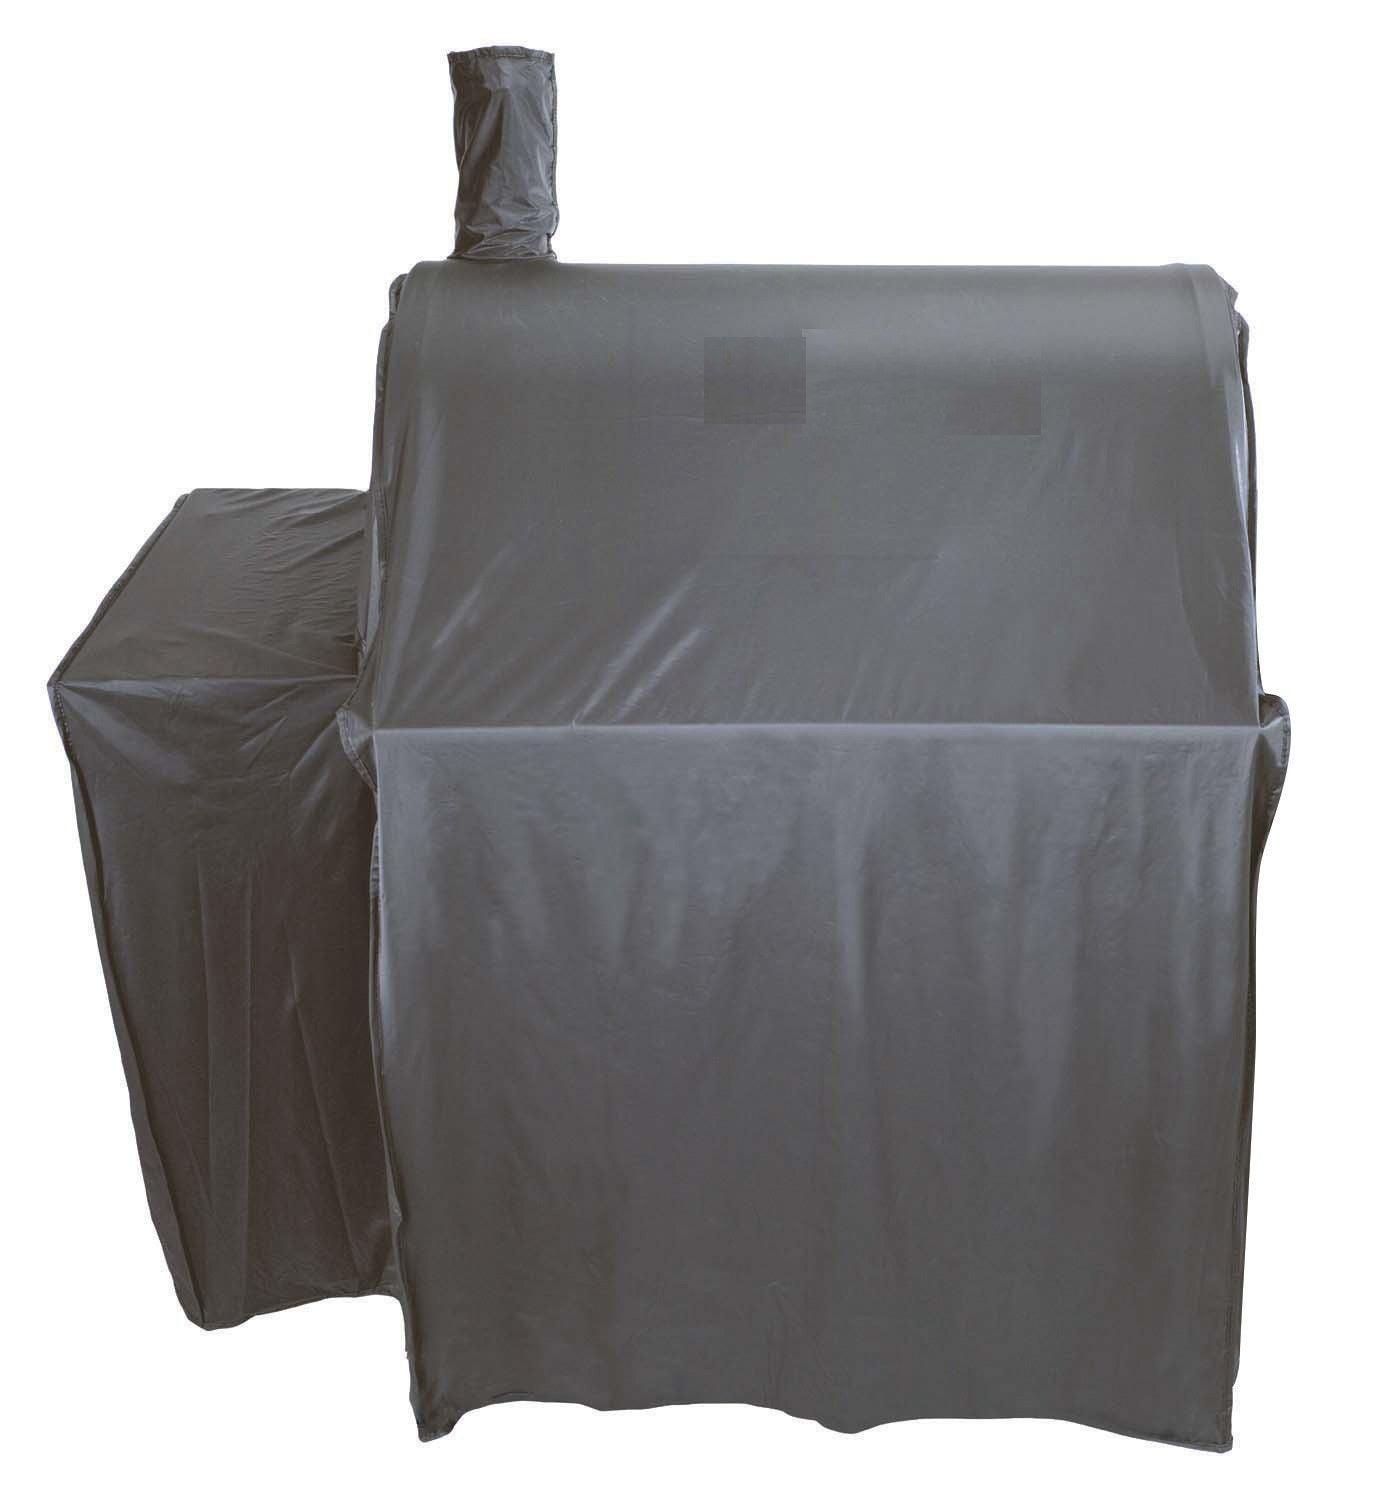 Cover for Char-Griller Outlaw BBQ or XXL Smoker - BBQ Land